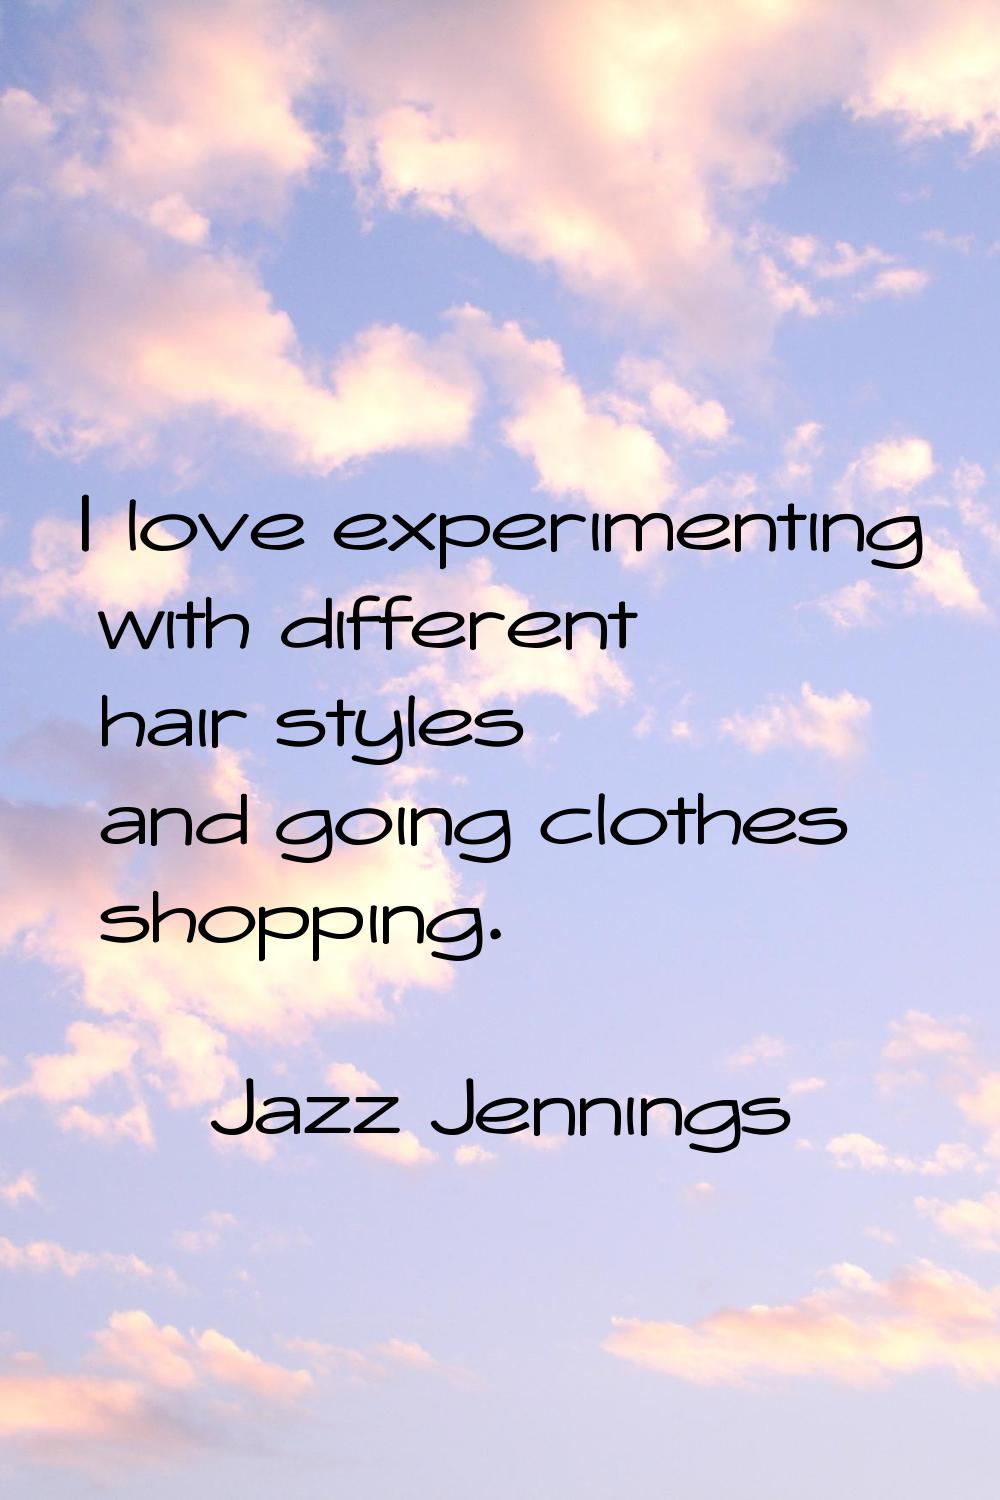 I love experimenting with different hair styles and going clothes shopping.